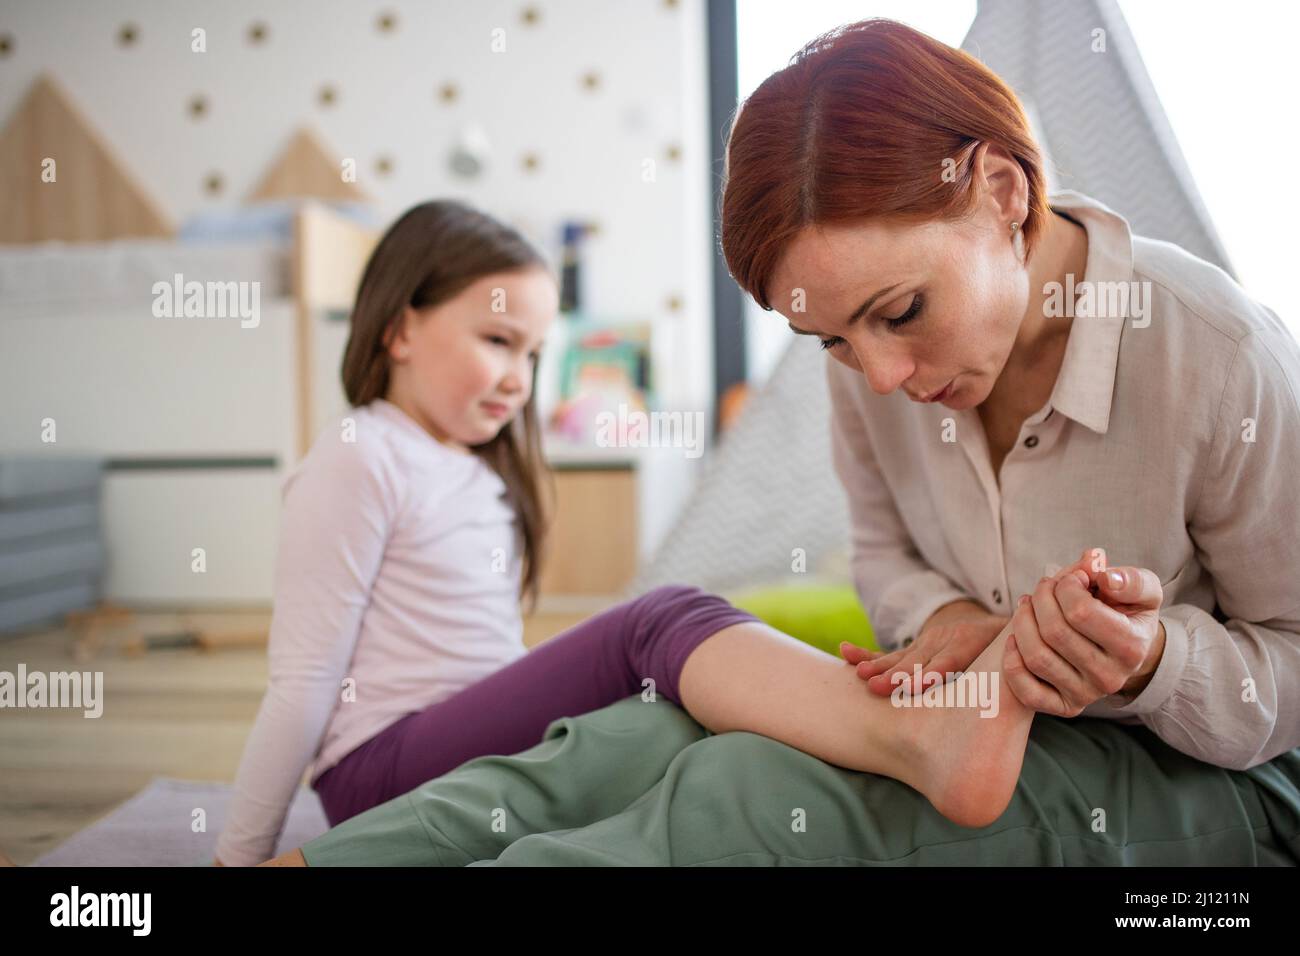 Mother blowing her little daughter's hurt ankle. Stock Photo